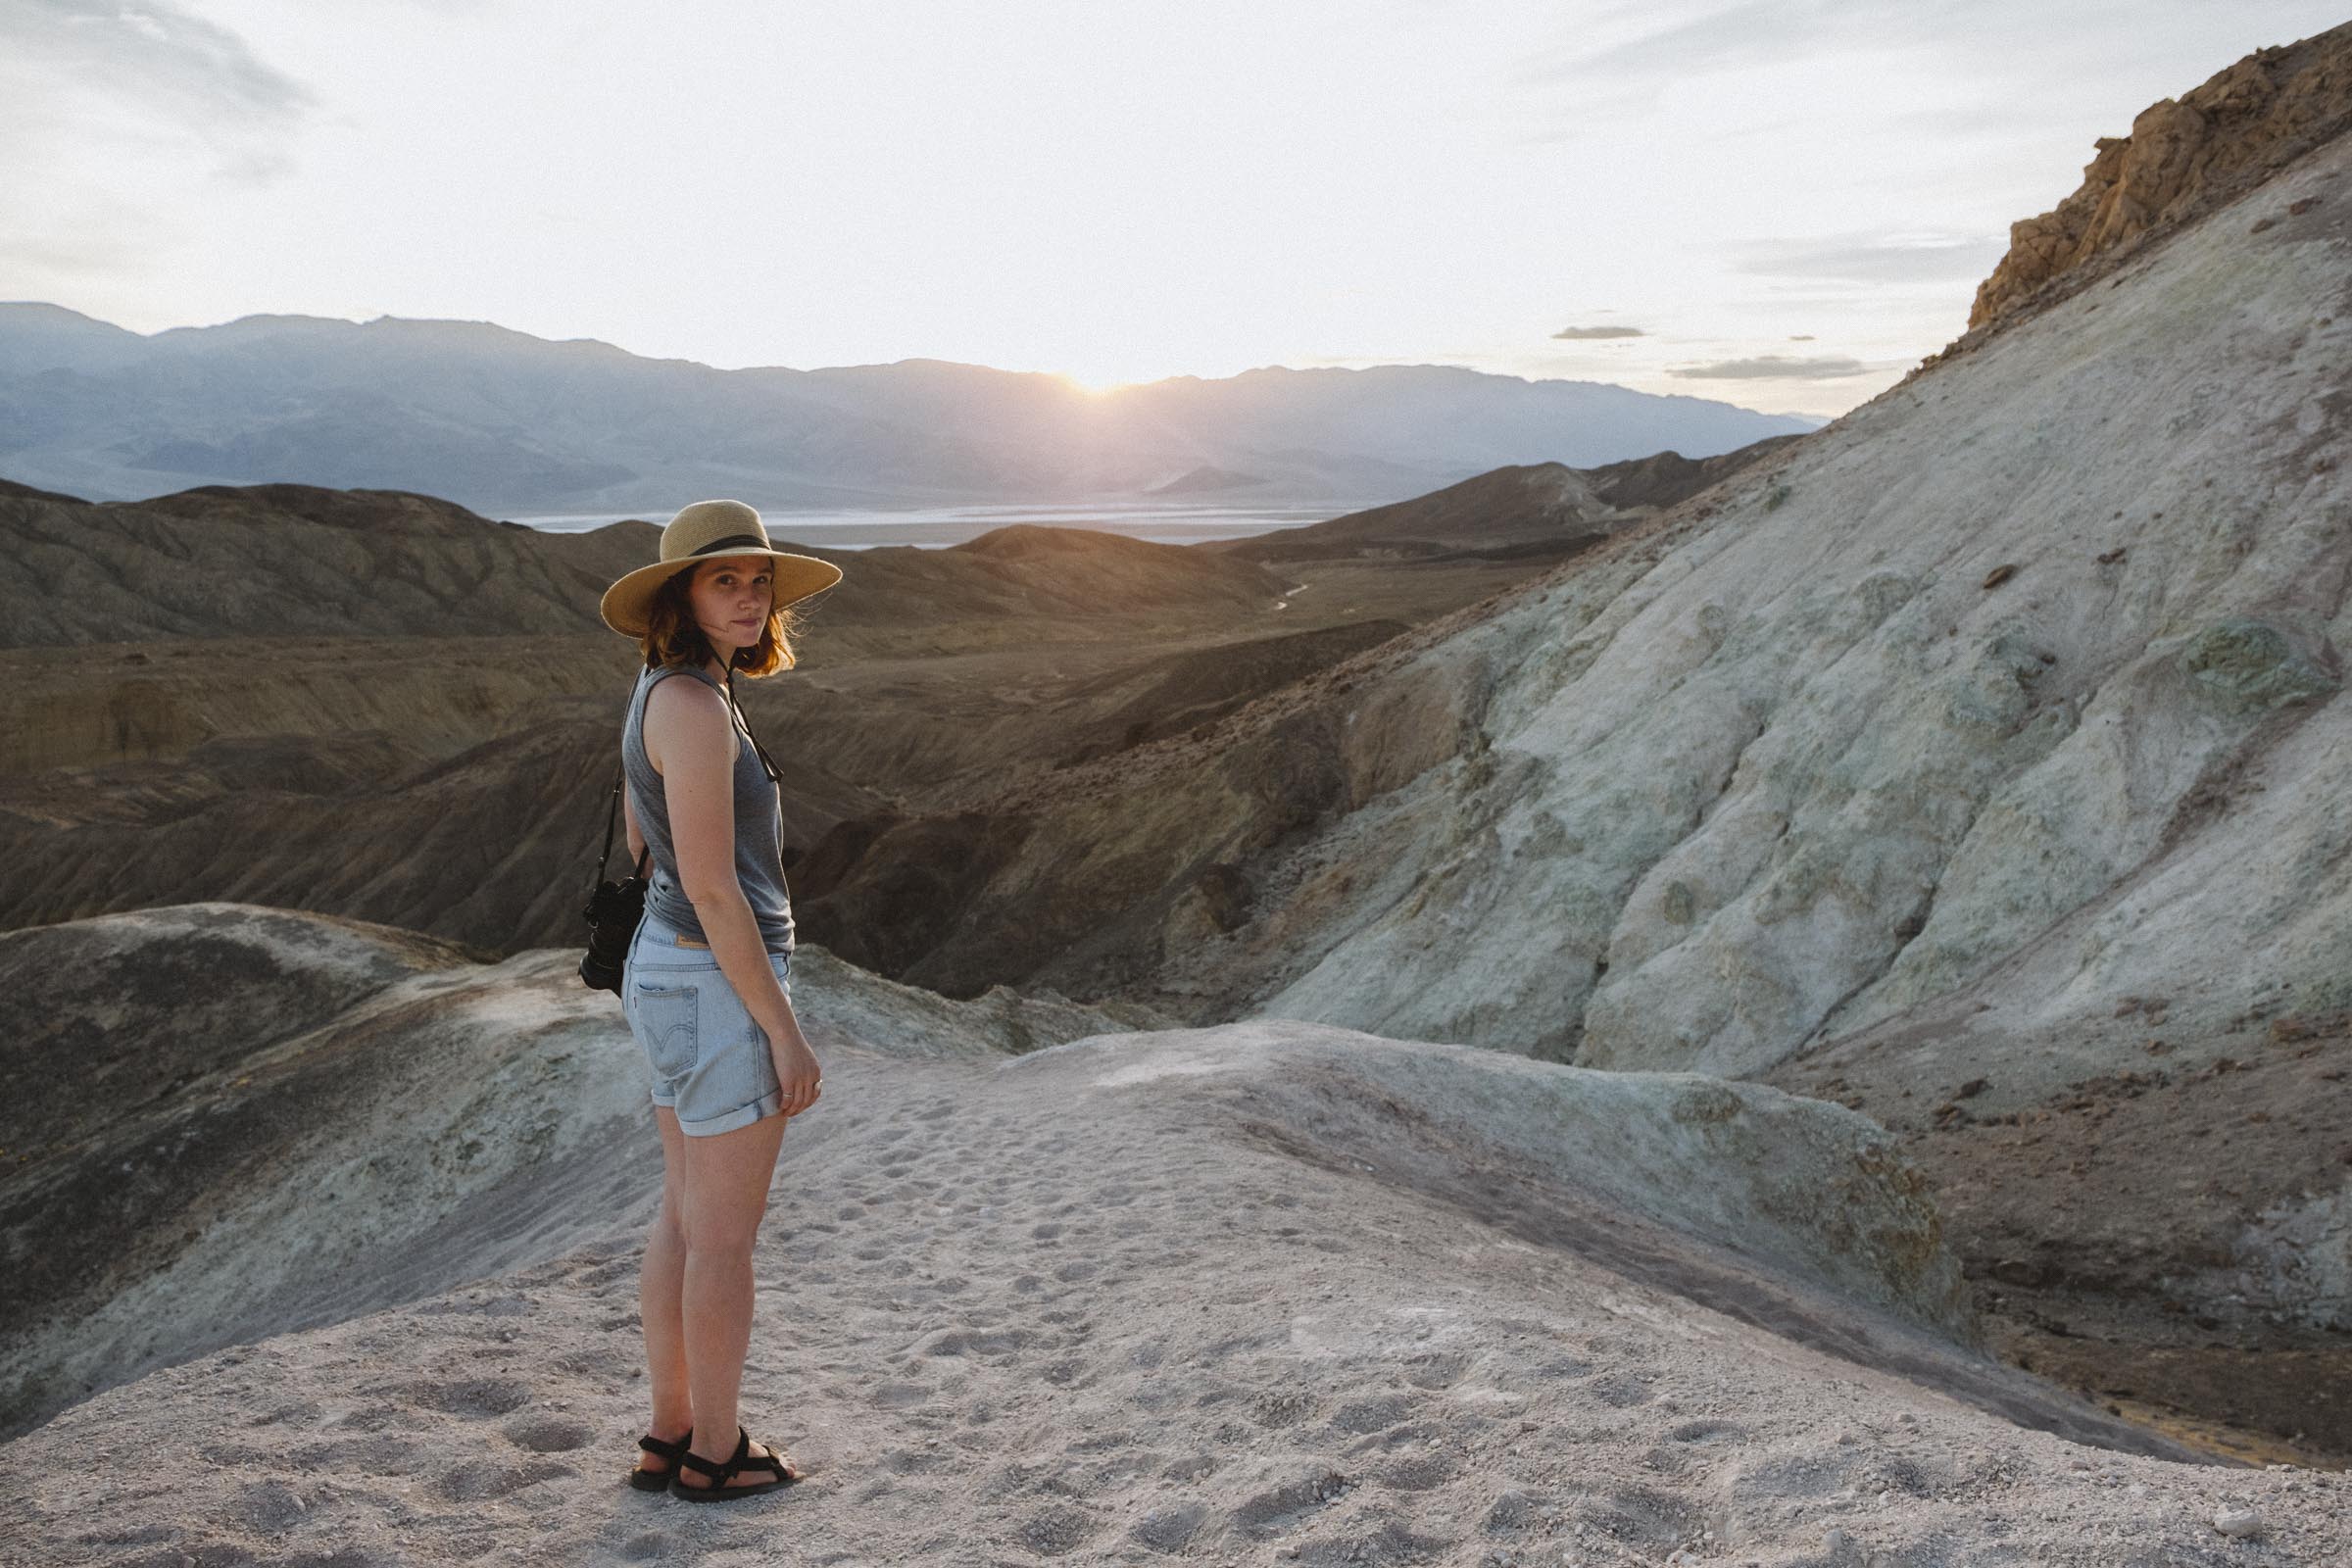 Sunset over the rugged wastes of Death Valley